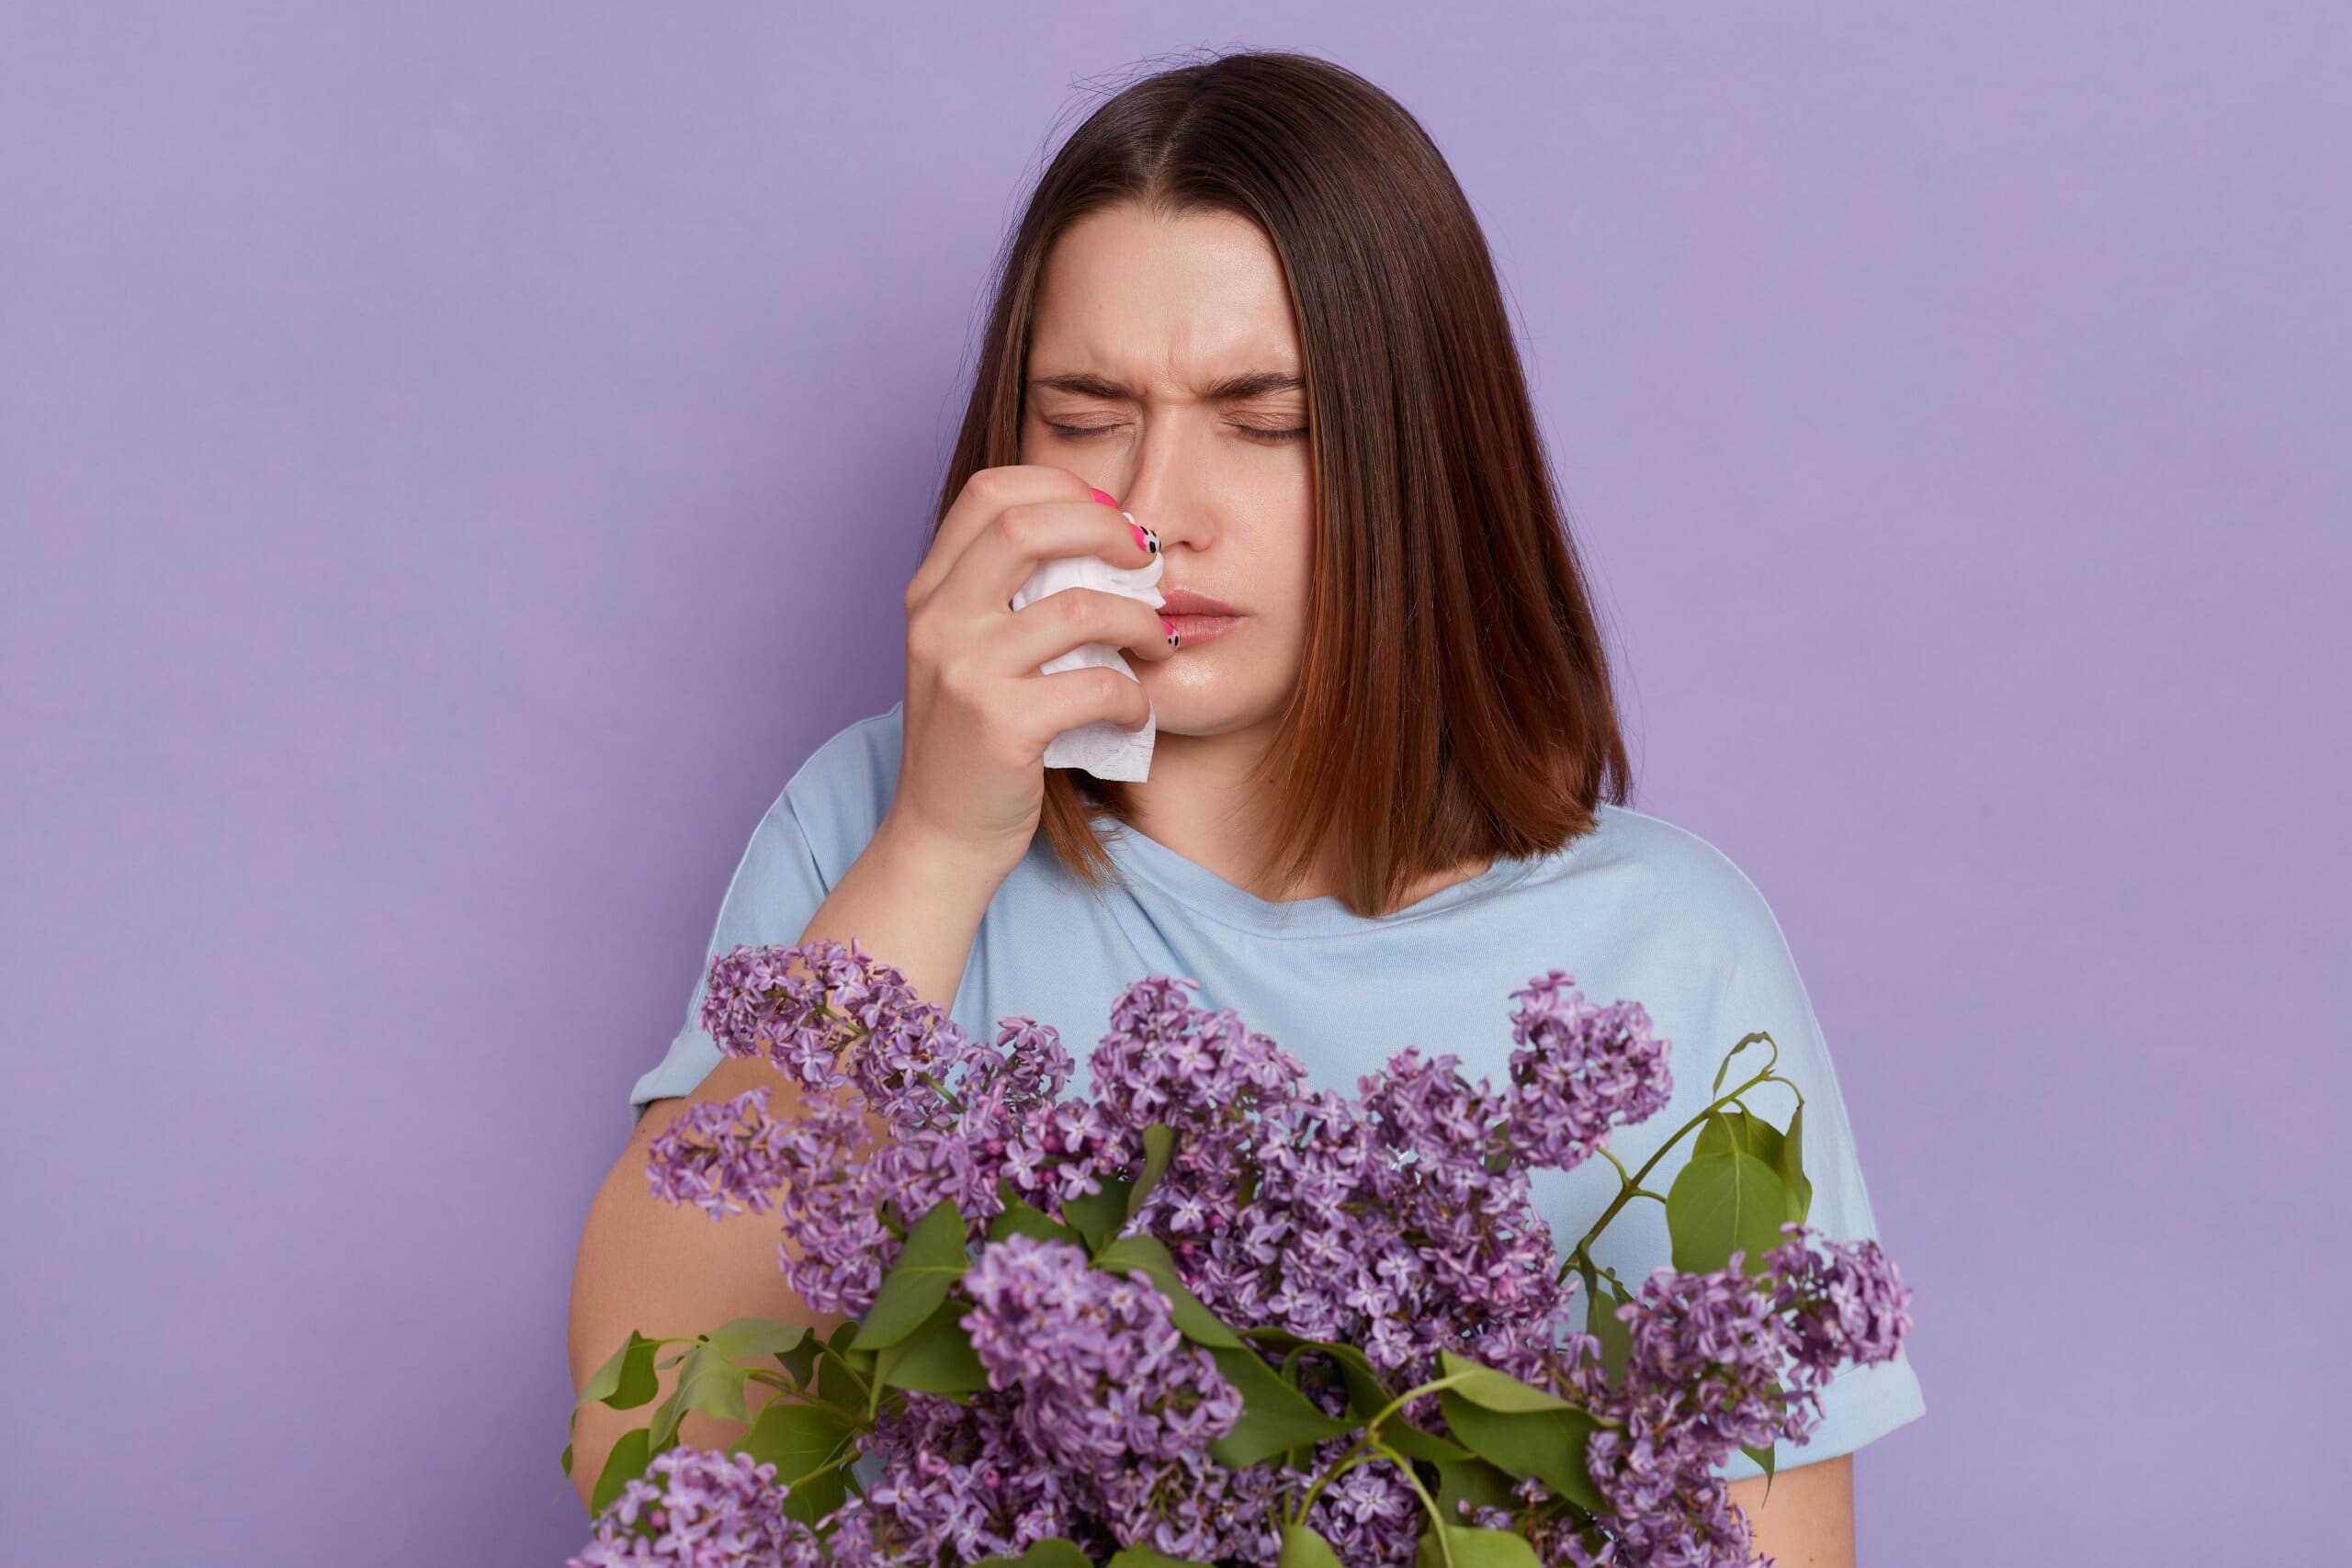 Woman suffering from Allergic Rhinitis sneezing as she holds a bunch of purple flowers.